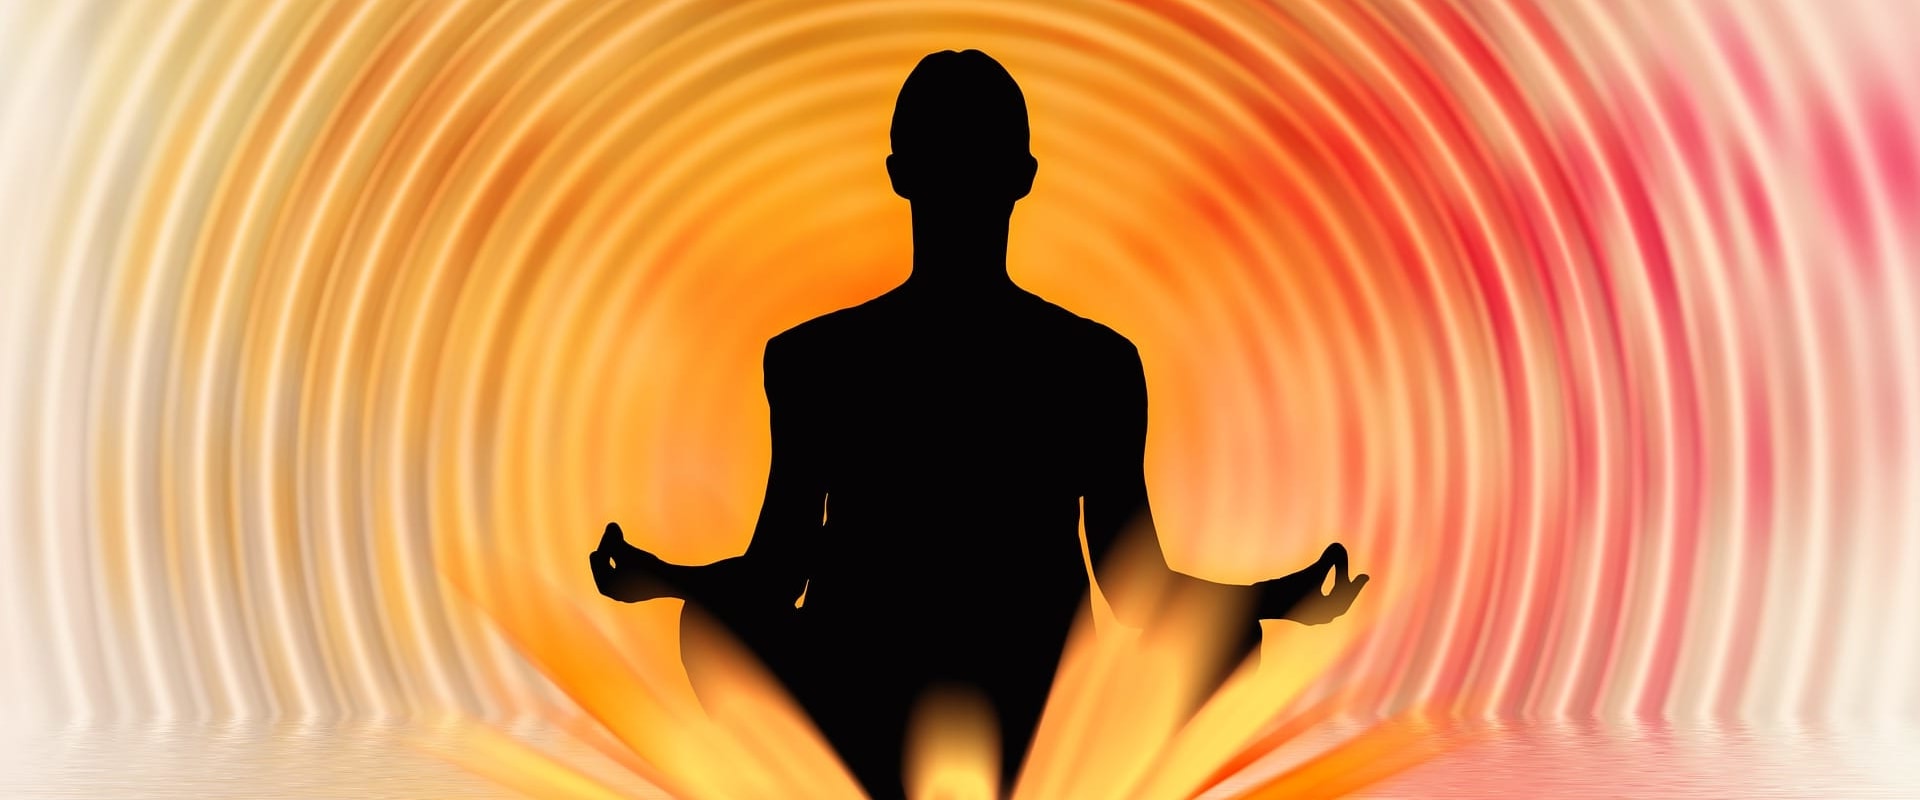 Achieving Spiritual Health: How to Connect with Your Higher Power